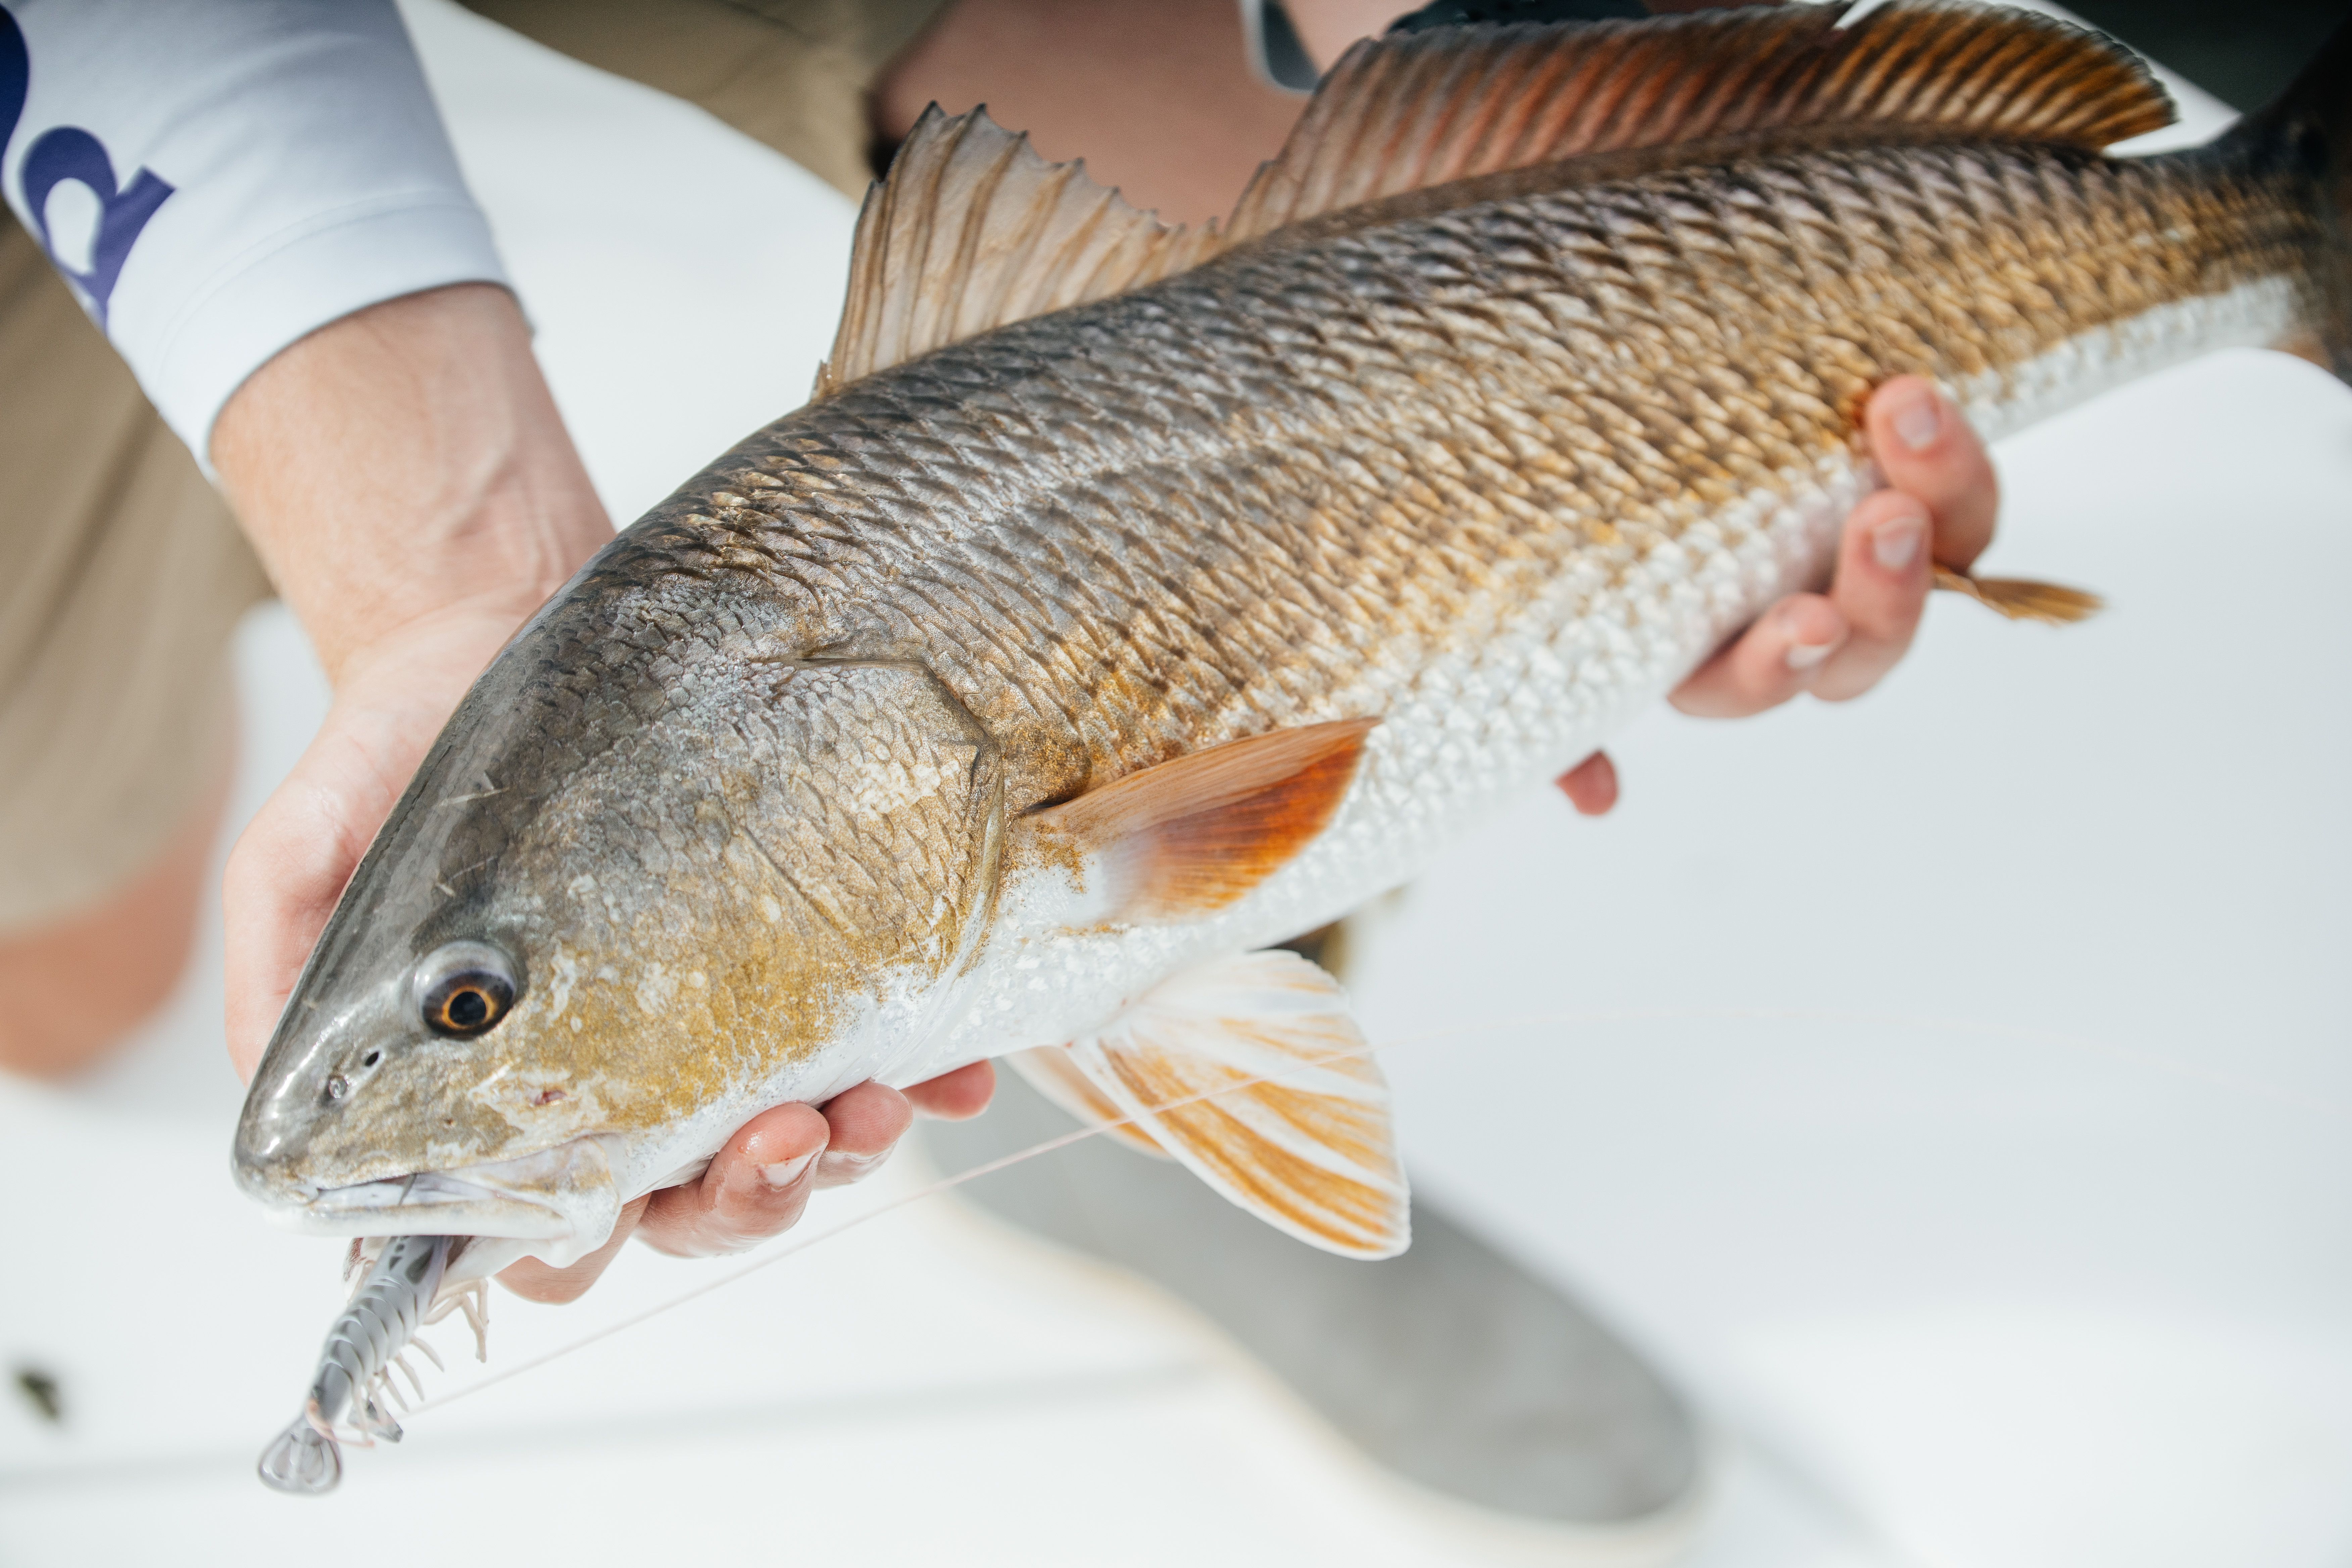 Why You Need a Popping Cork For Redfish